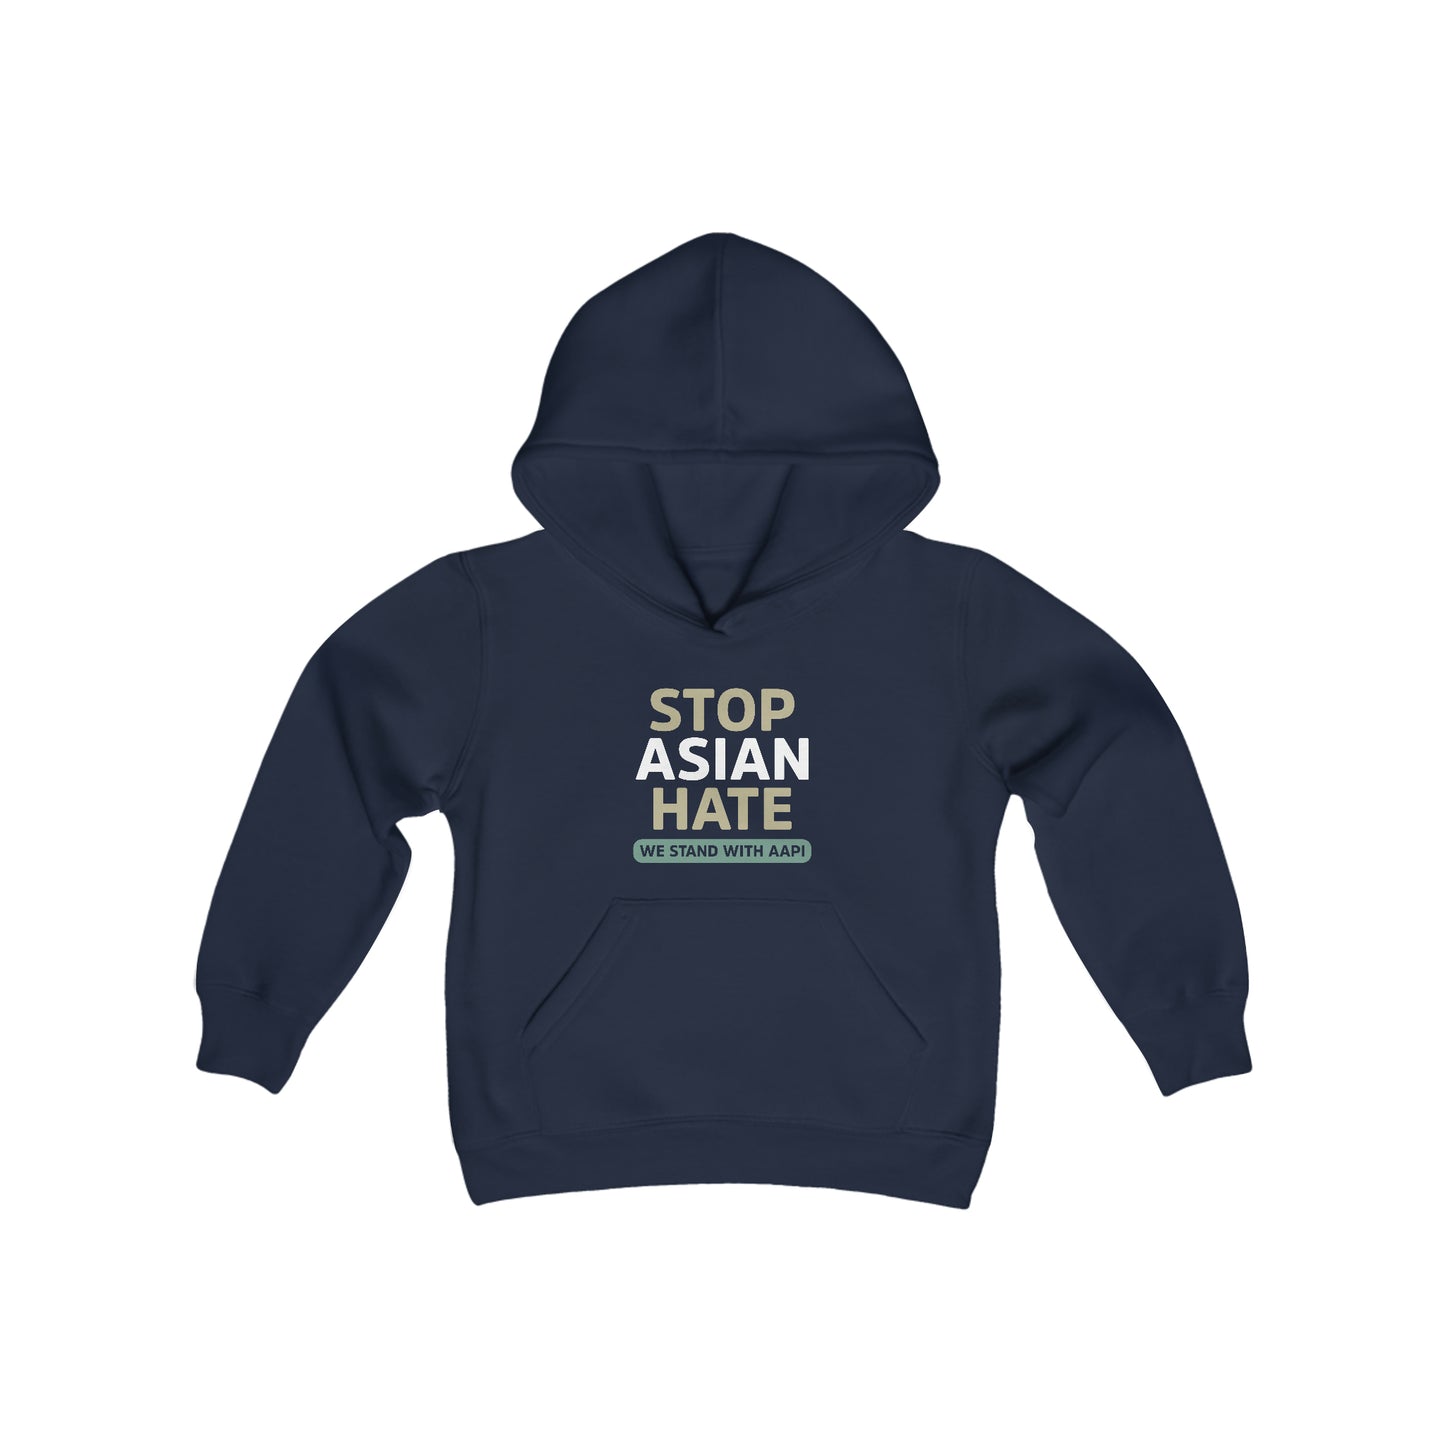 “Stop Asian Hate” Youth Hoodie